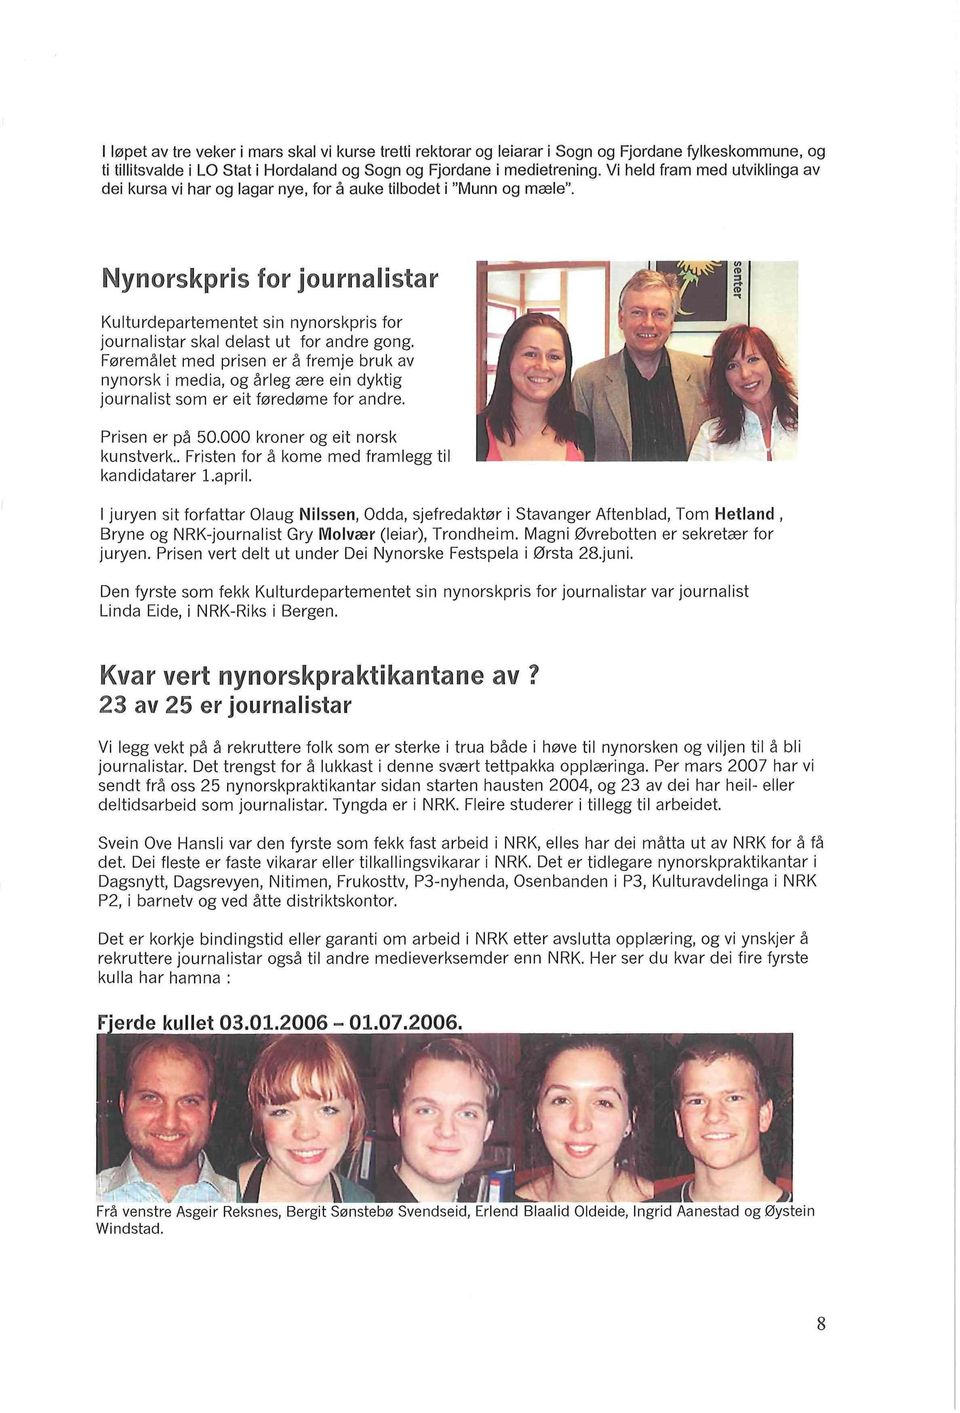 Nynorskpris for journalistar Kulturdepartementet sin nynorskpris for journalistar skal delast ut for andre gong.